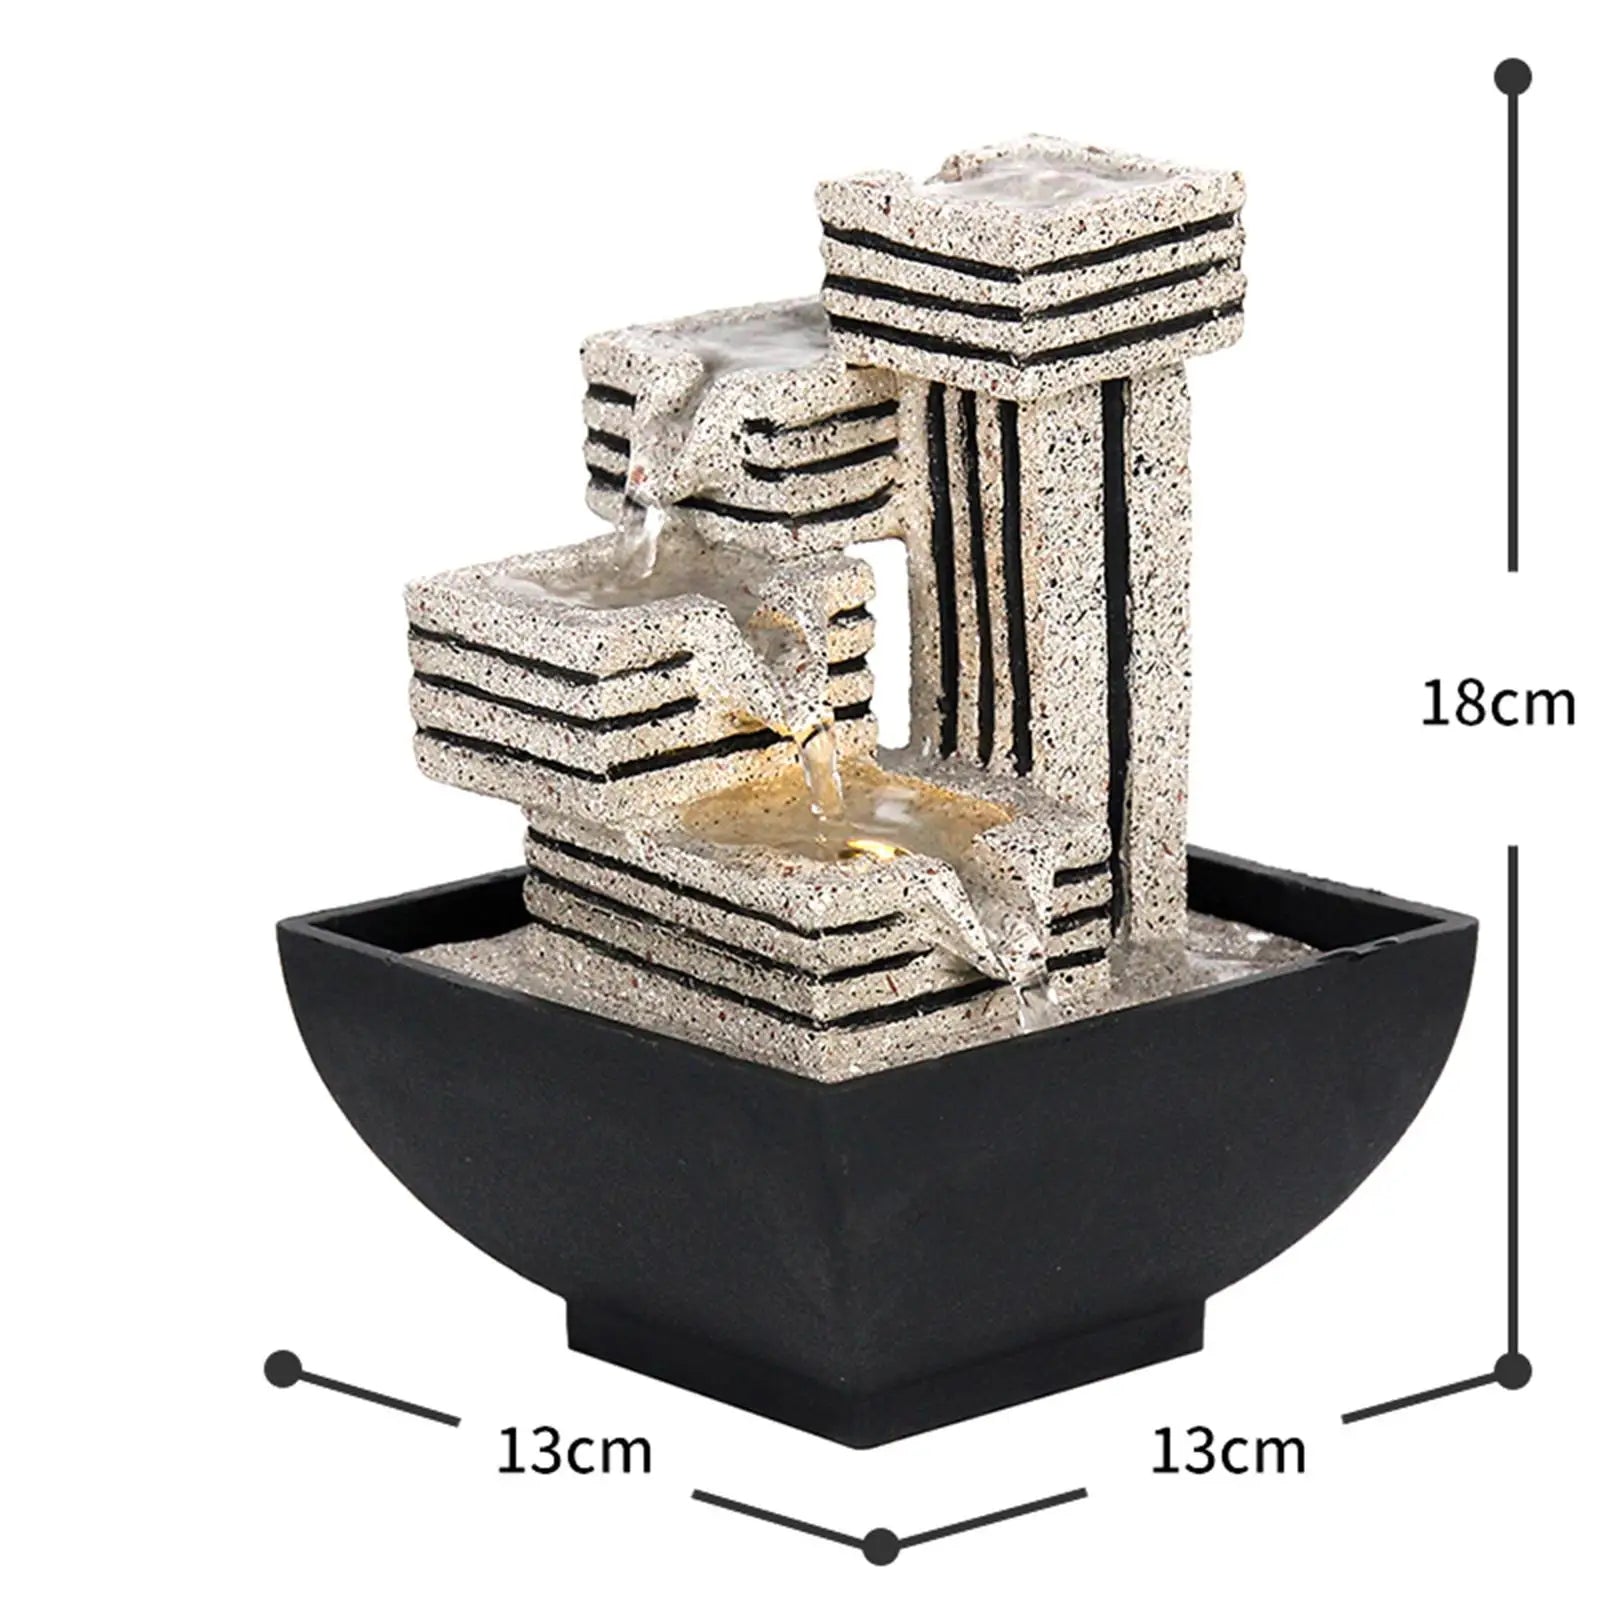 4 Tiers Indoor Water Fountain Tabletop Fountain Waterfall with Scene Lights for Living Room Fish Tank Garden Home Decor